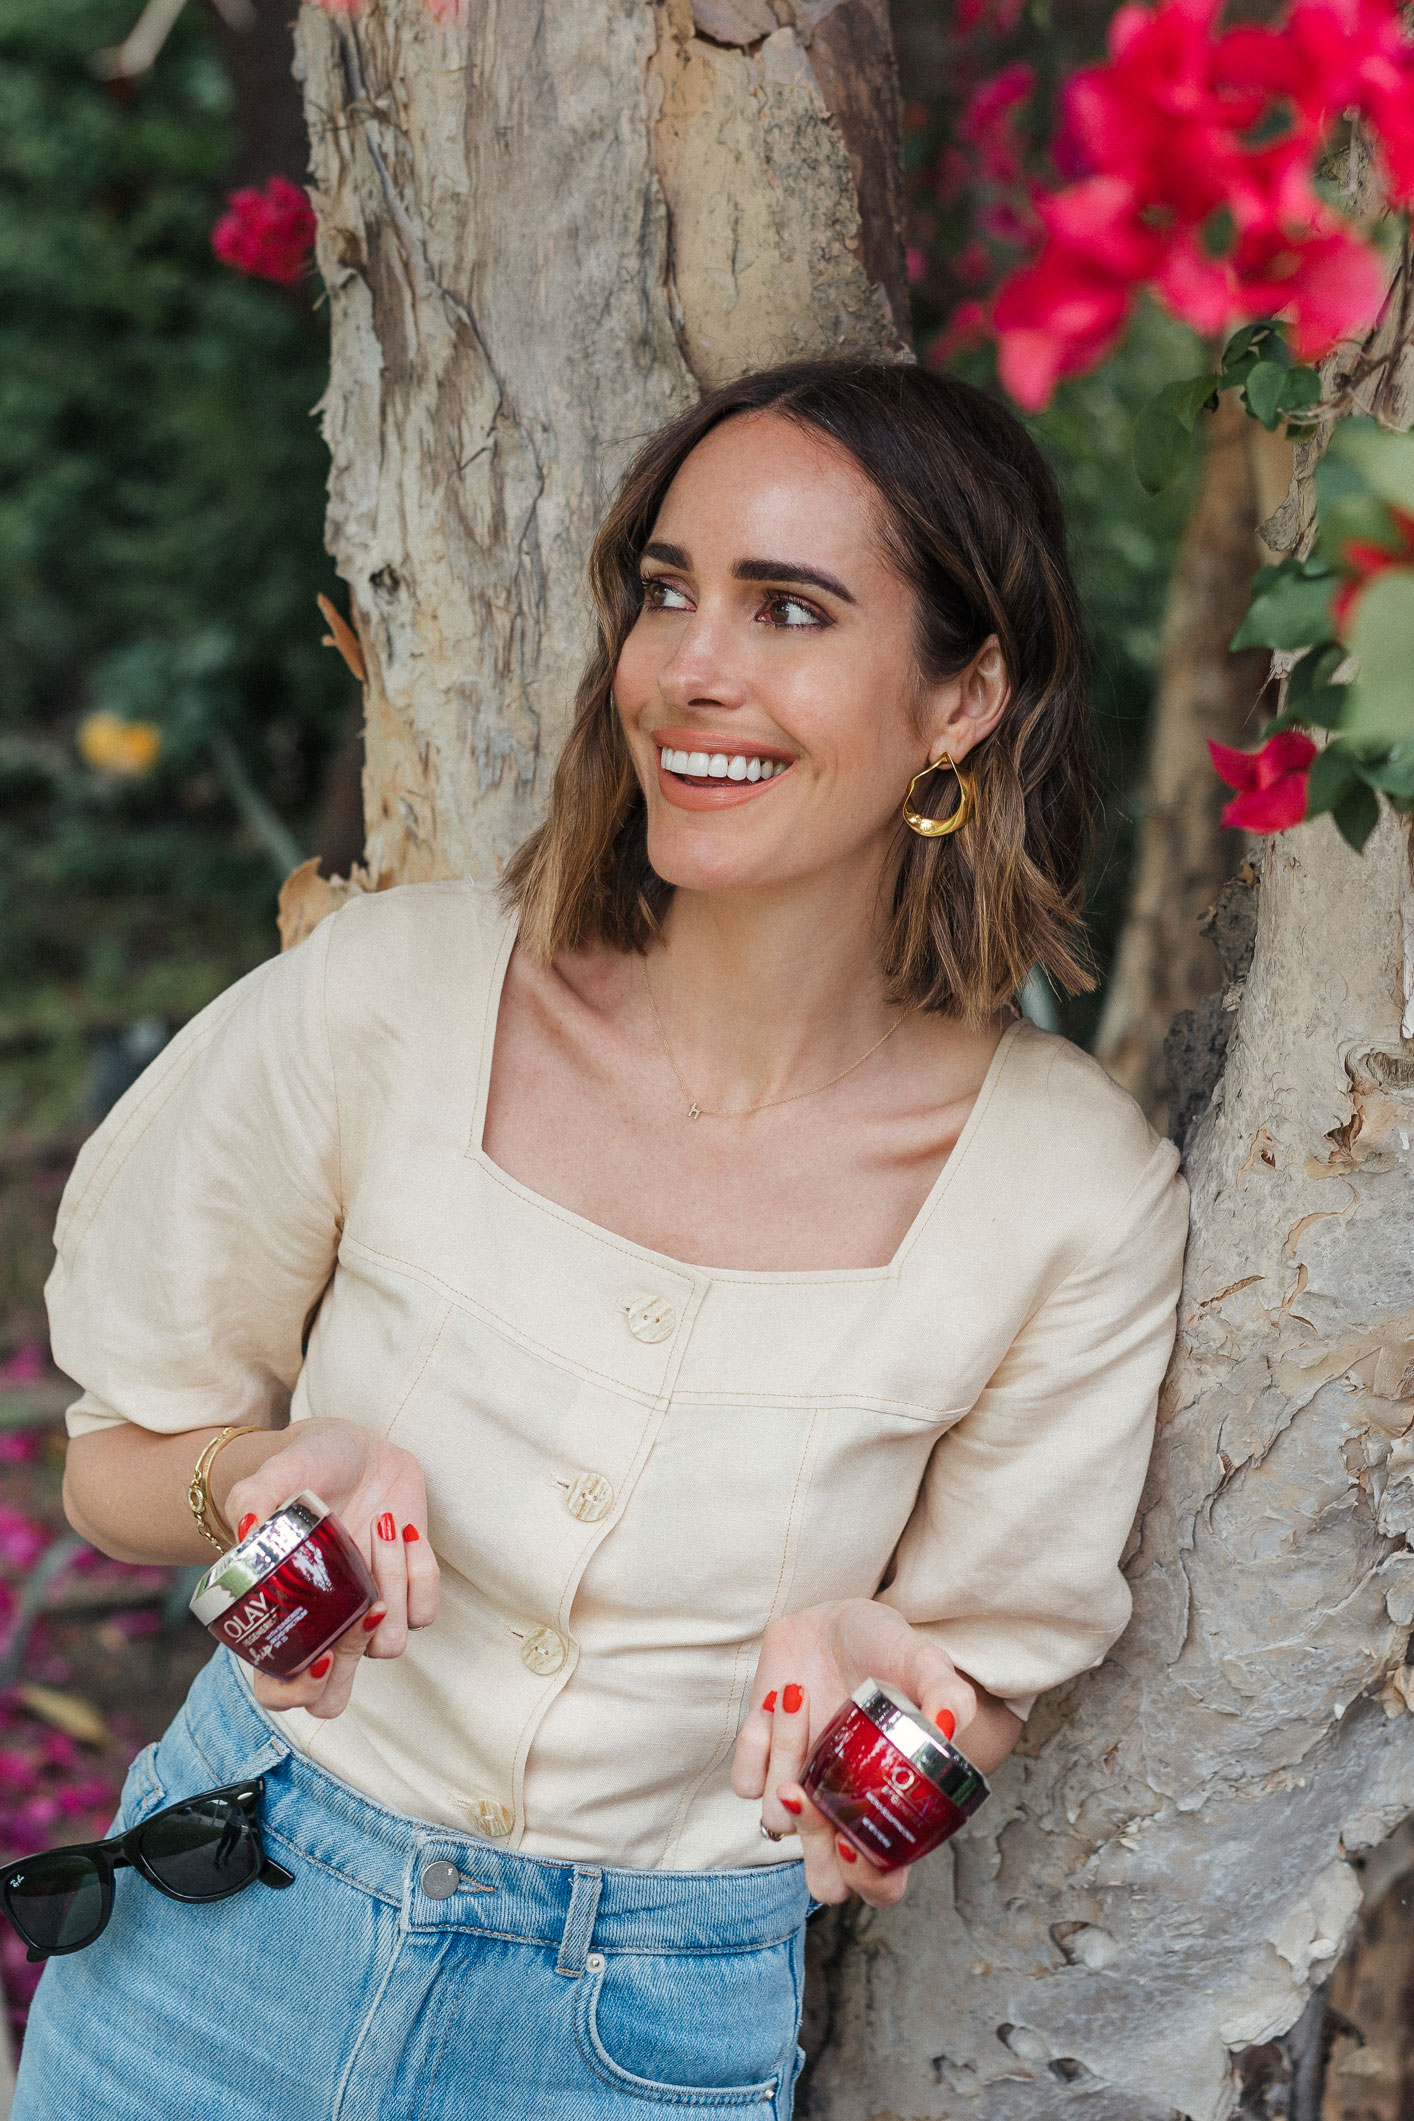 Louise Roe of Front Roe sharing her skincare secrets and advice on which type of moisturizer is best from your skin type using Olay Regenerist